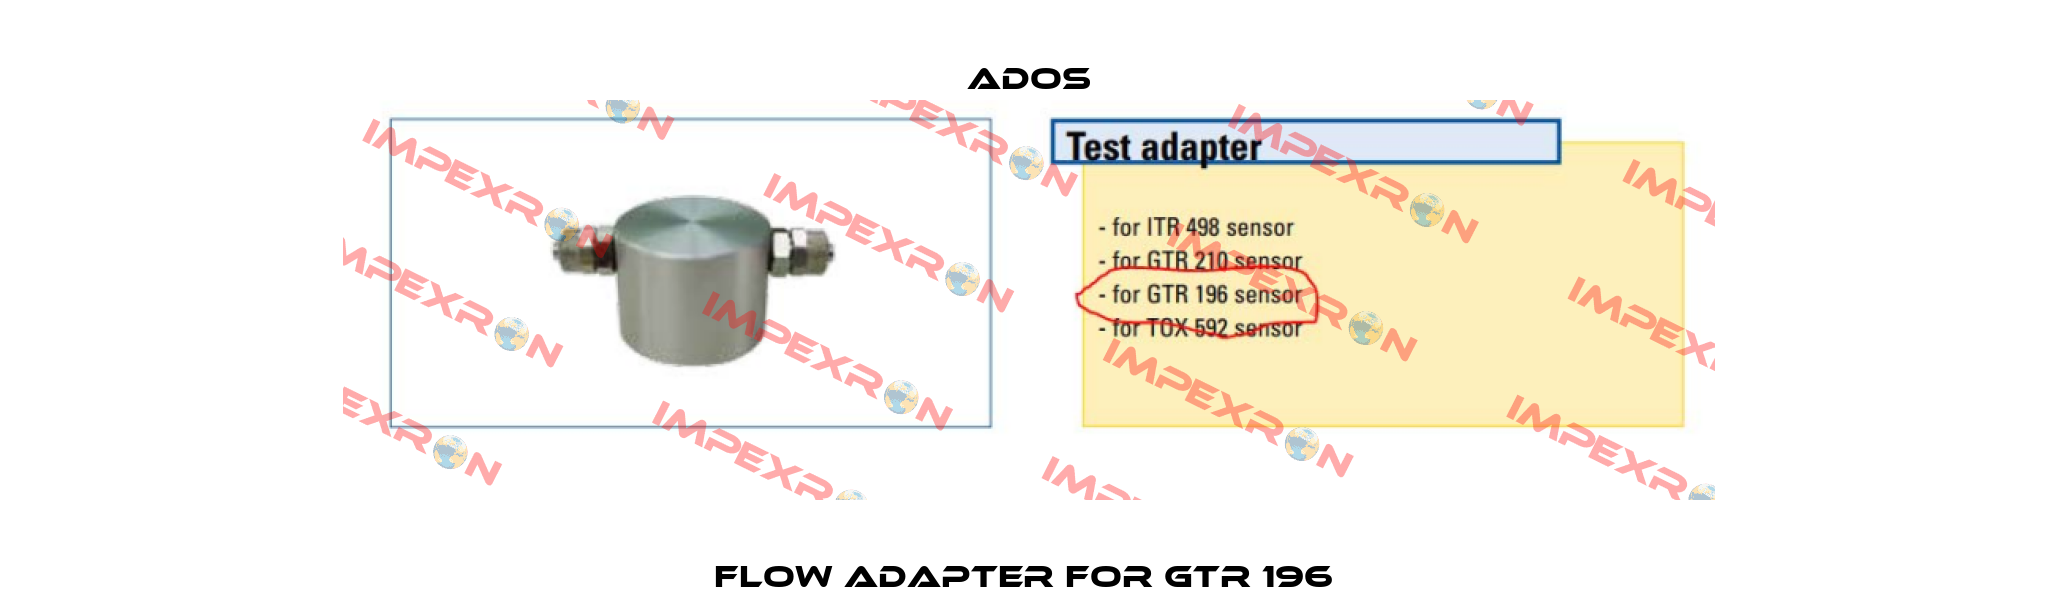 Flow adapter for GTR 196  Ados